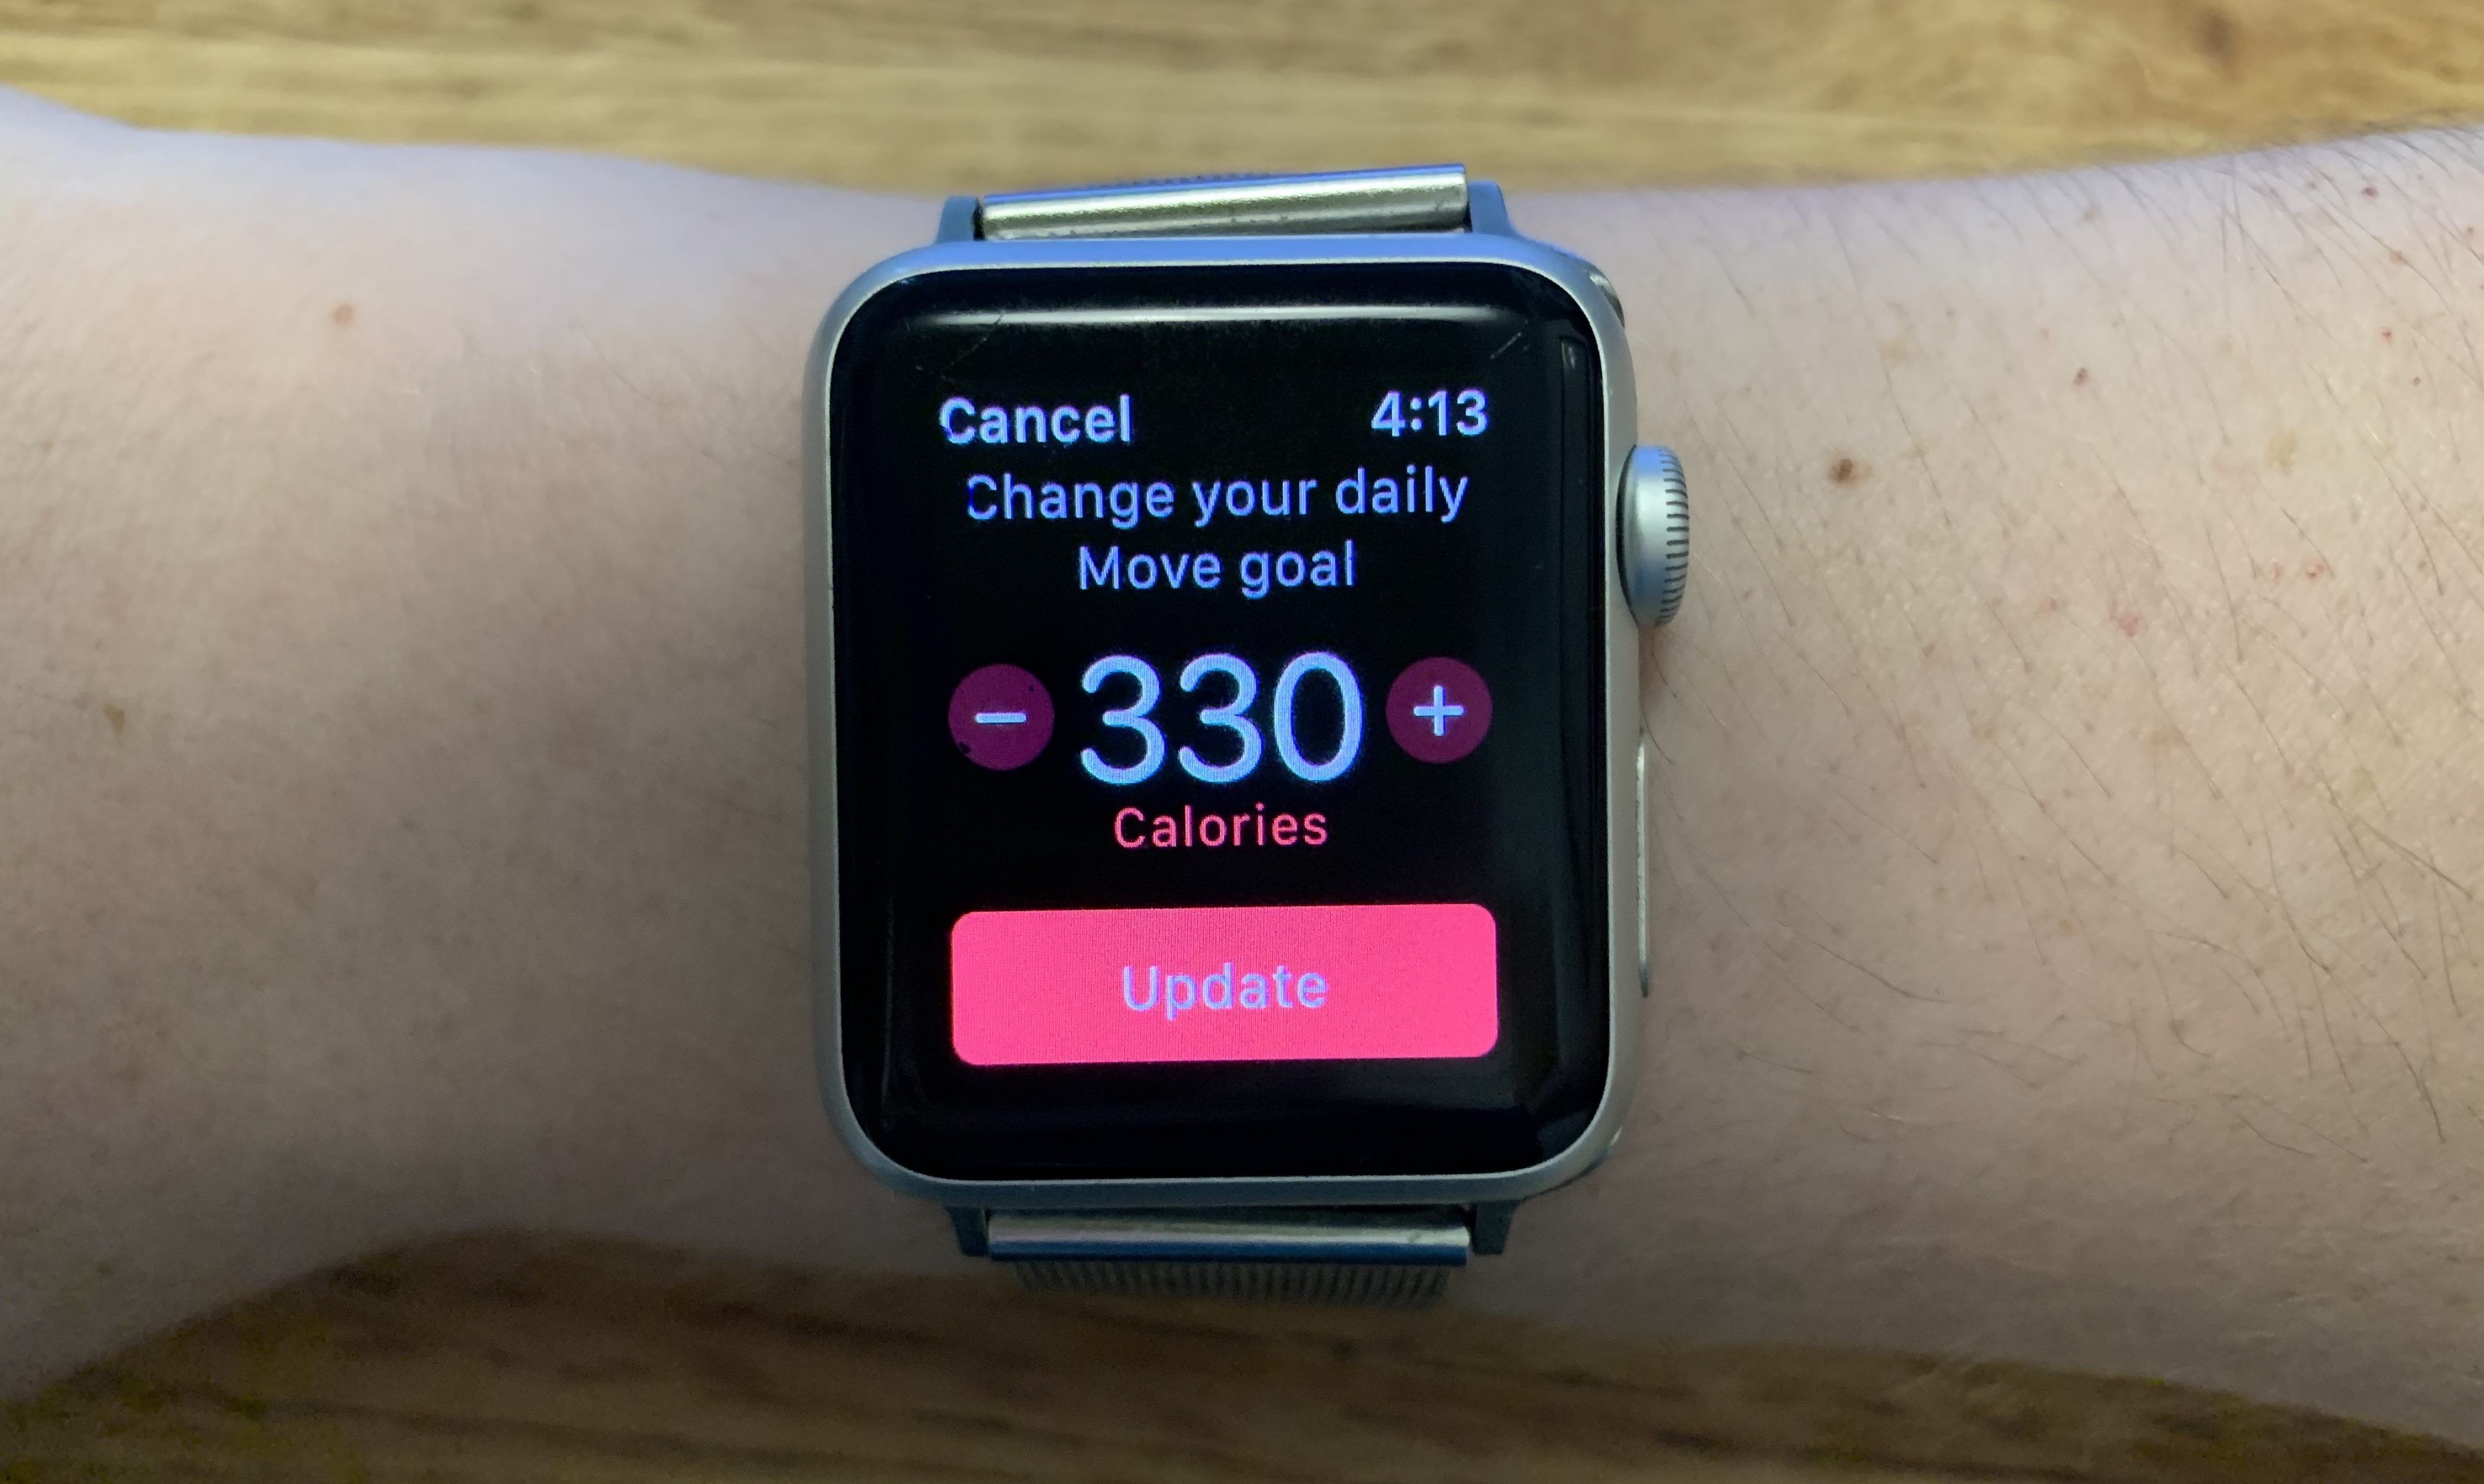 Move Goal being altered on an Apple Watch worn on a wrist